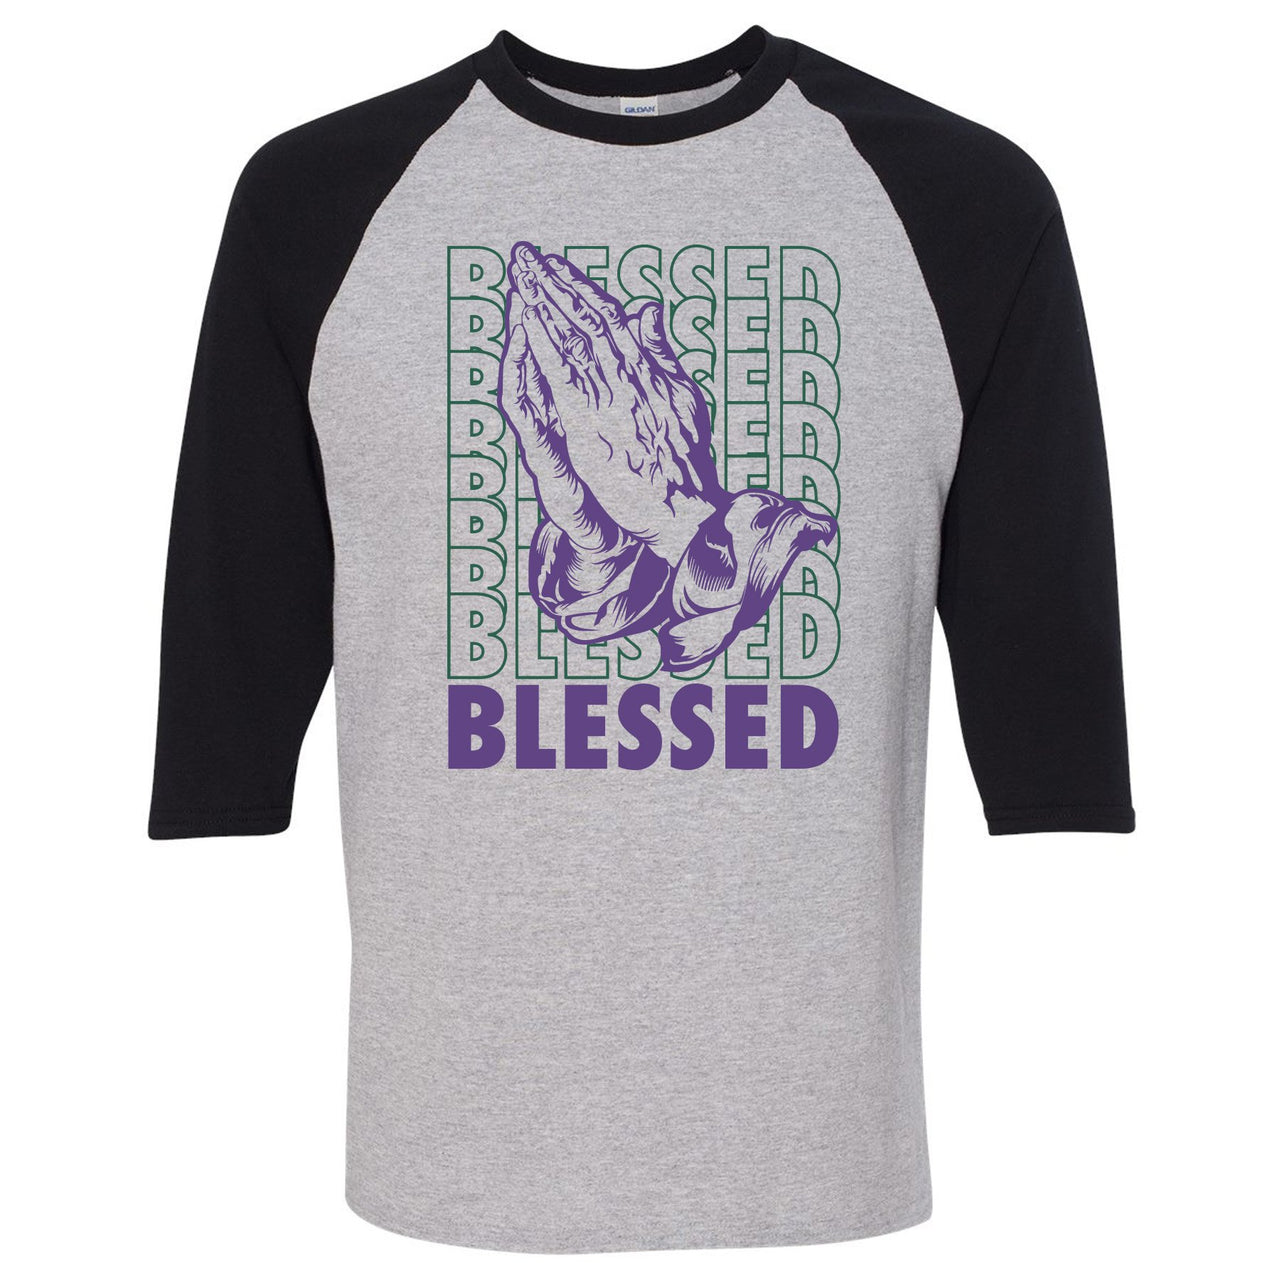 Ray Allen 7s Sneaker Hook Up Blessed Praying Hands Sports Gray and Black Raglan T-Shirt